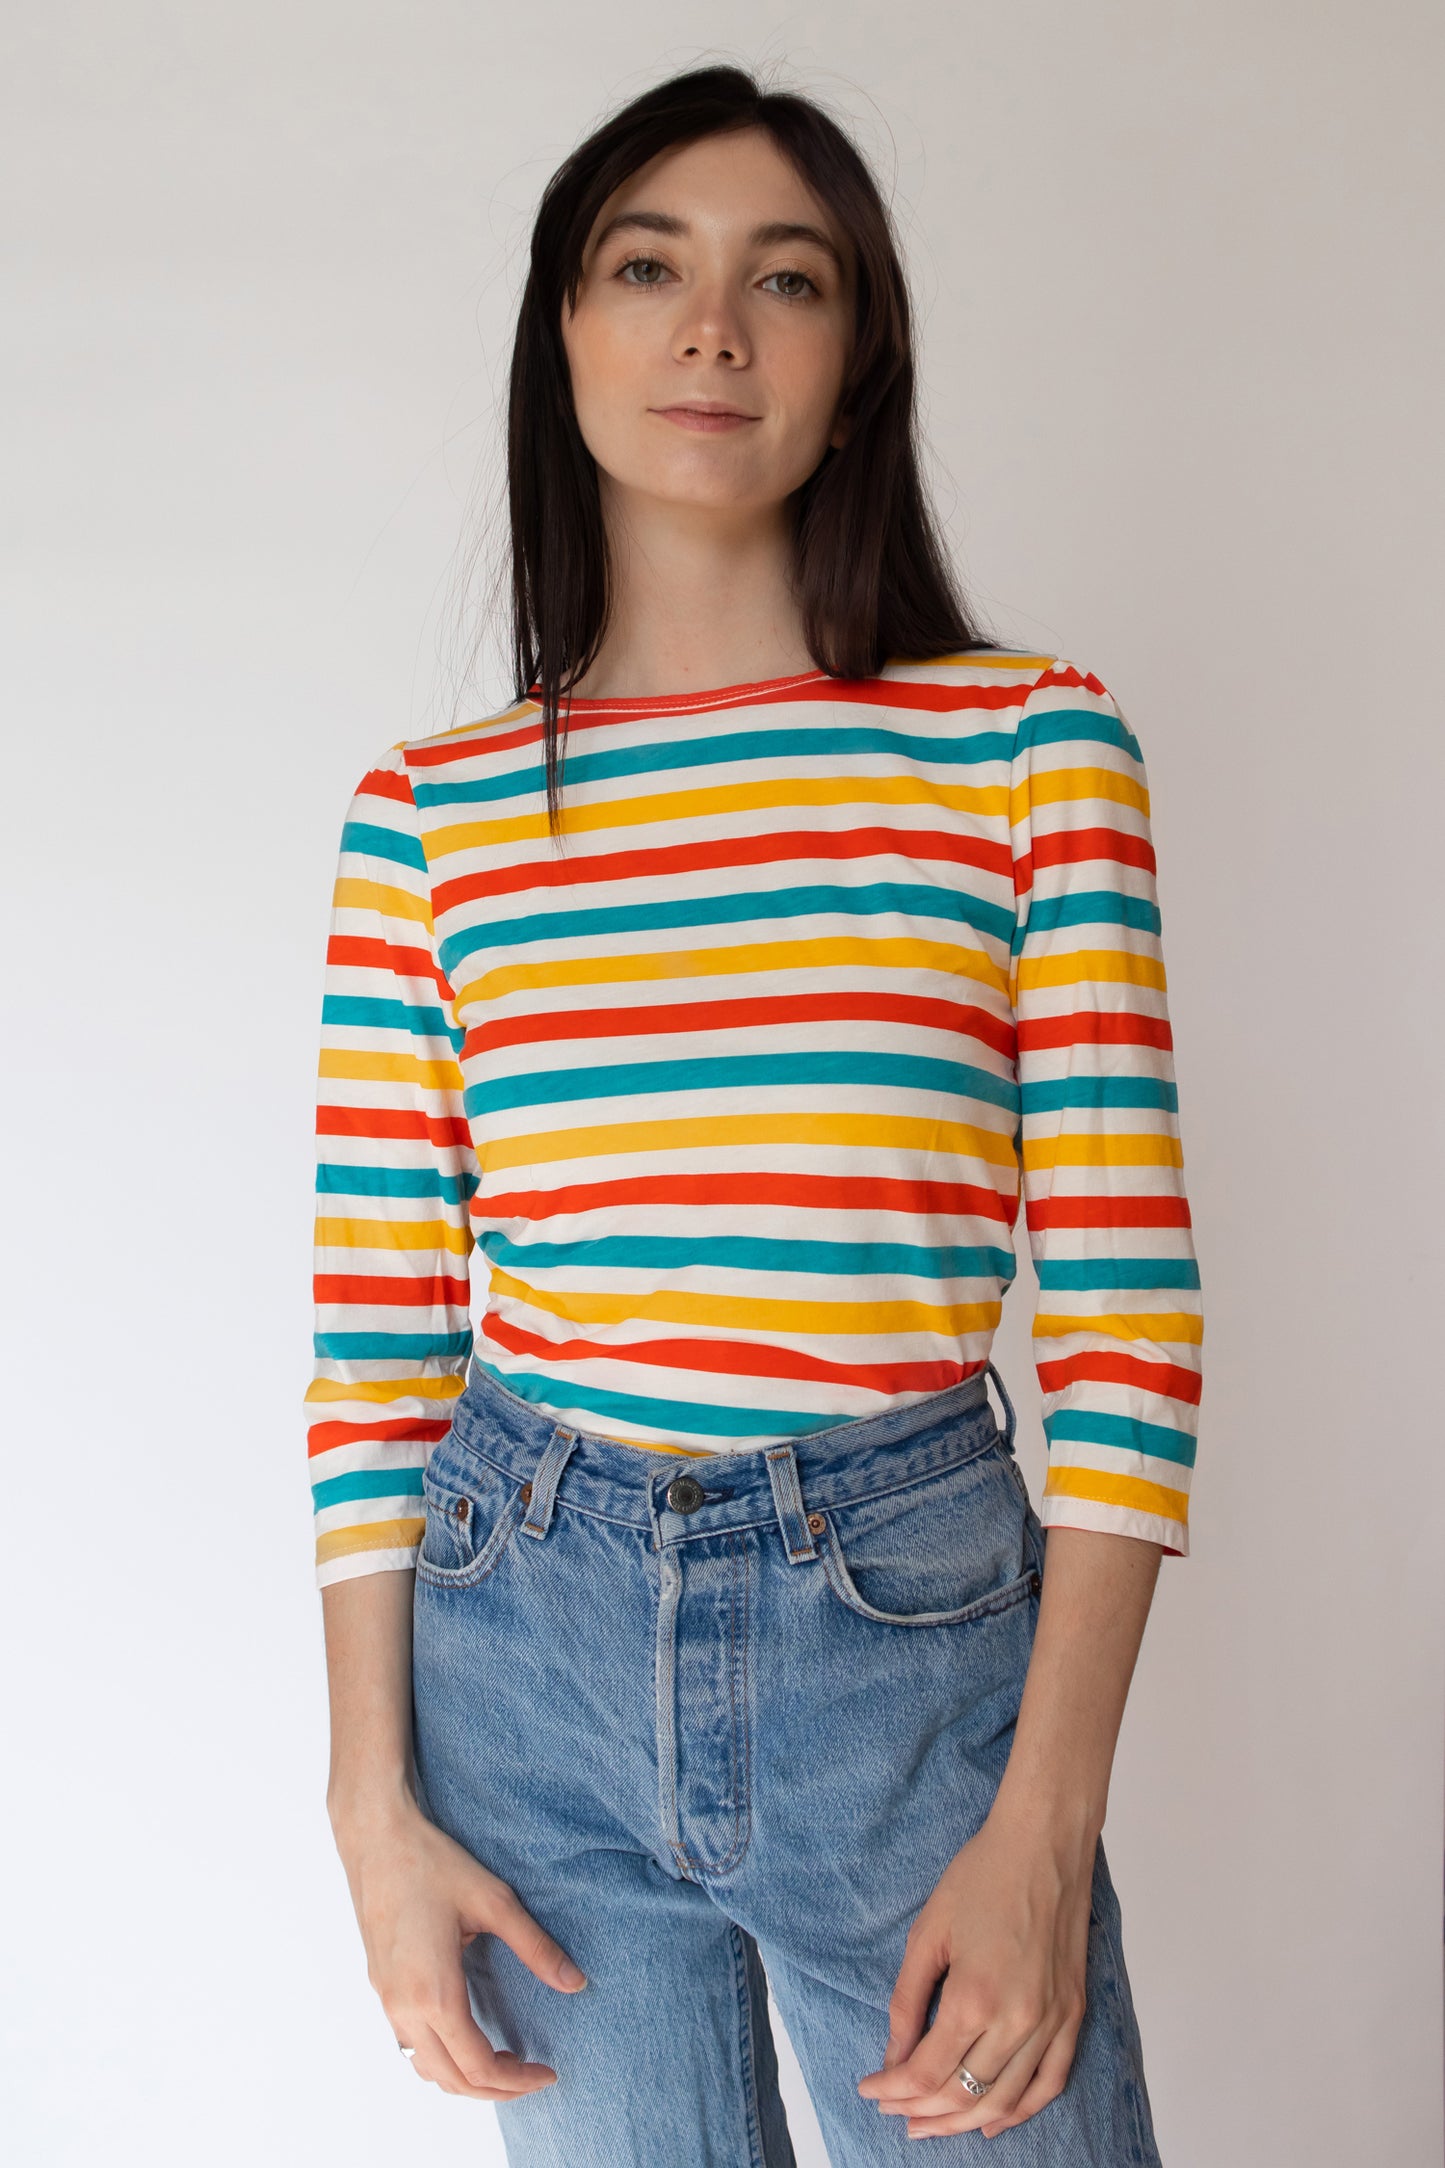 Dark-haired model in bright orange, yellow and blue 3/4 sleeved striped shirt 